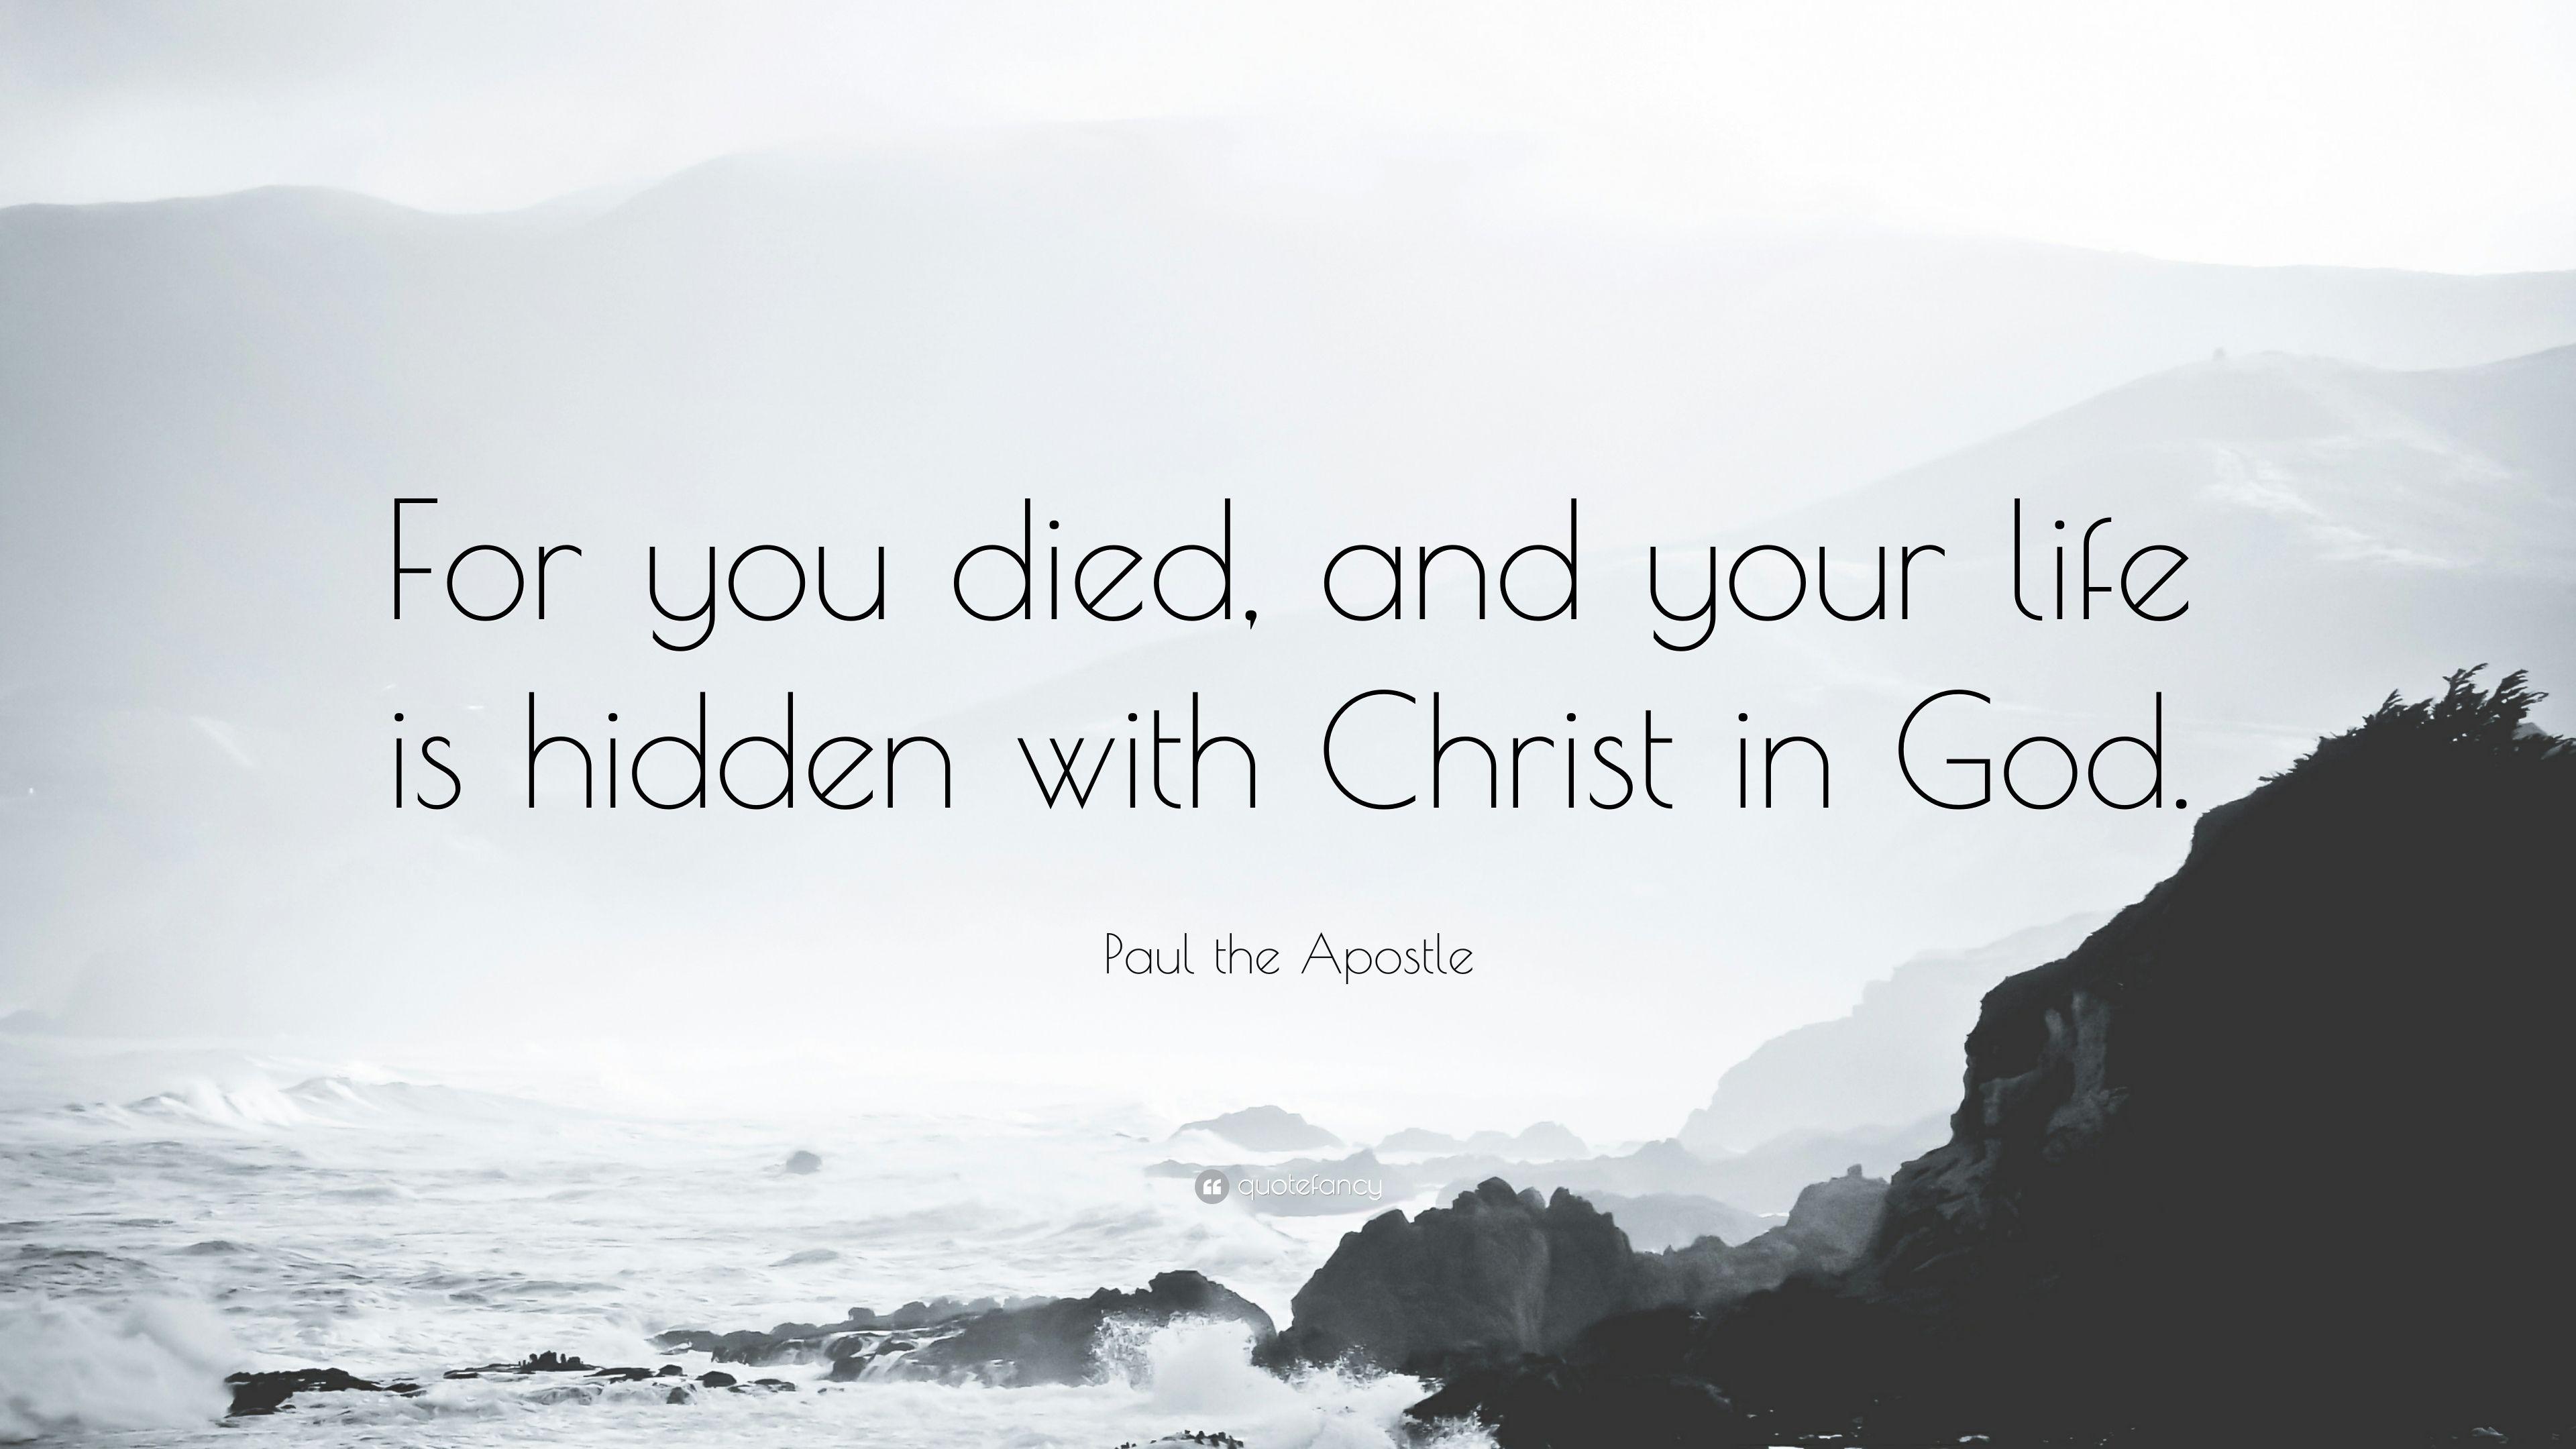 Paul the Apostle Quote: “For you died, and your life is hidden